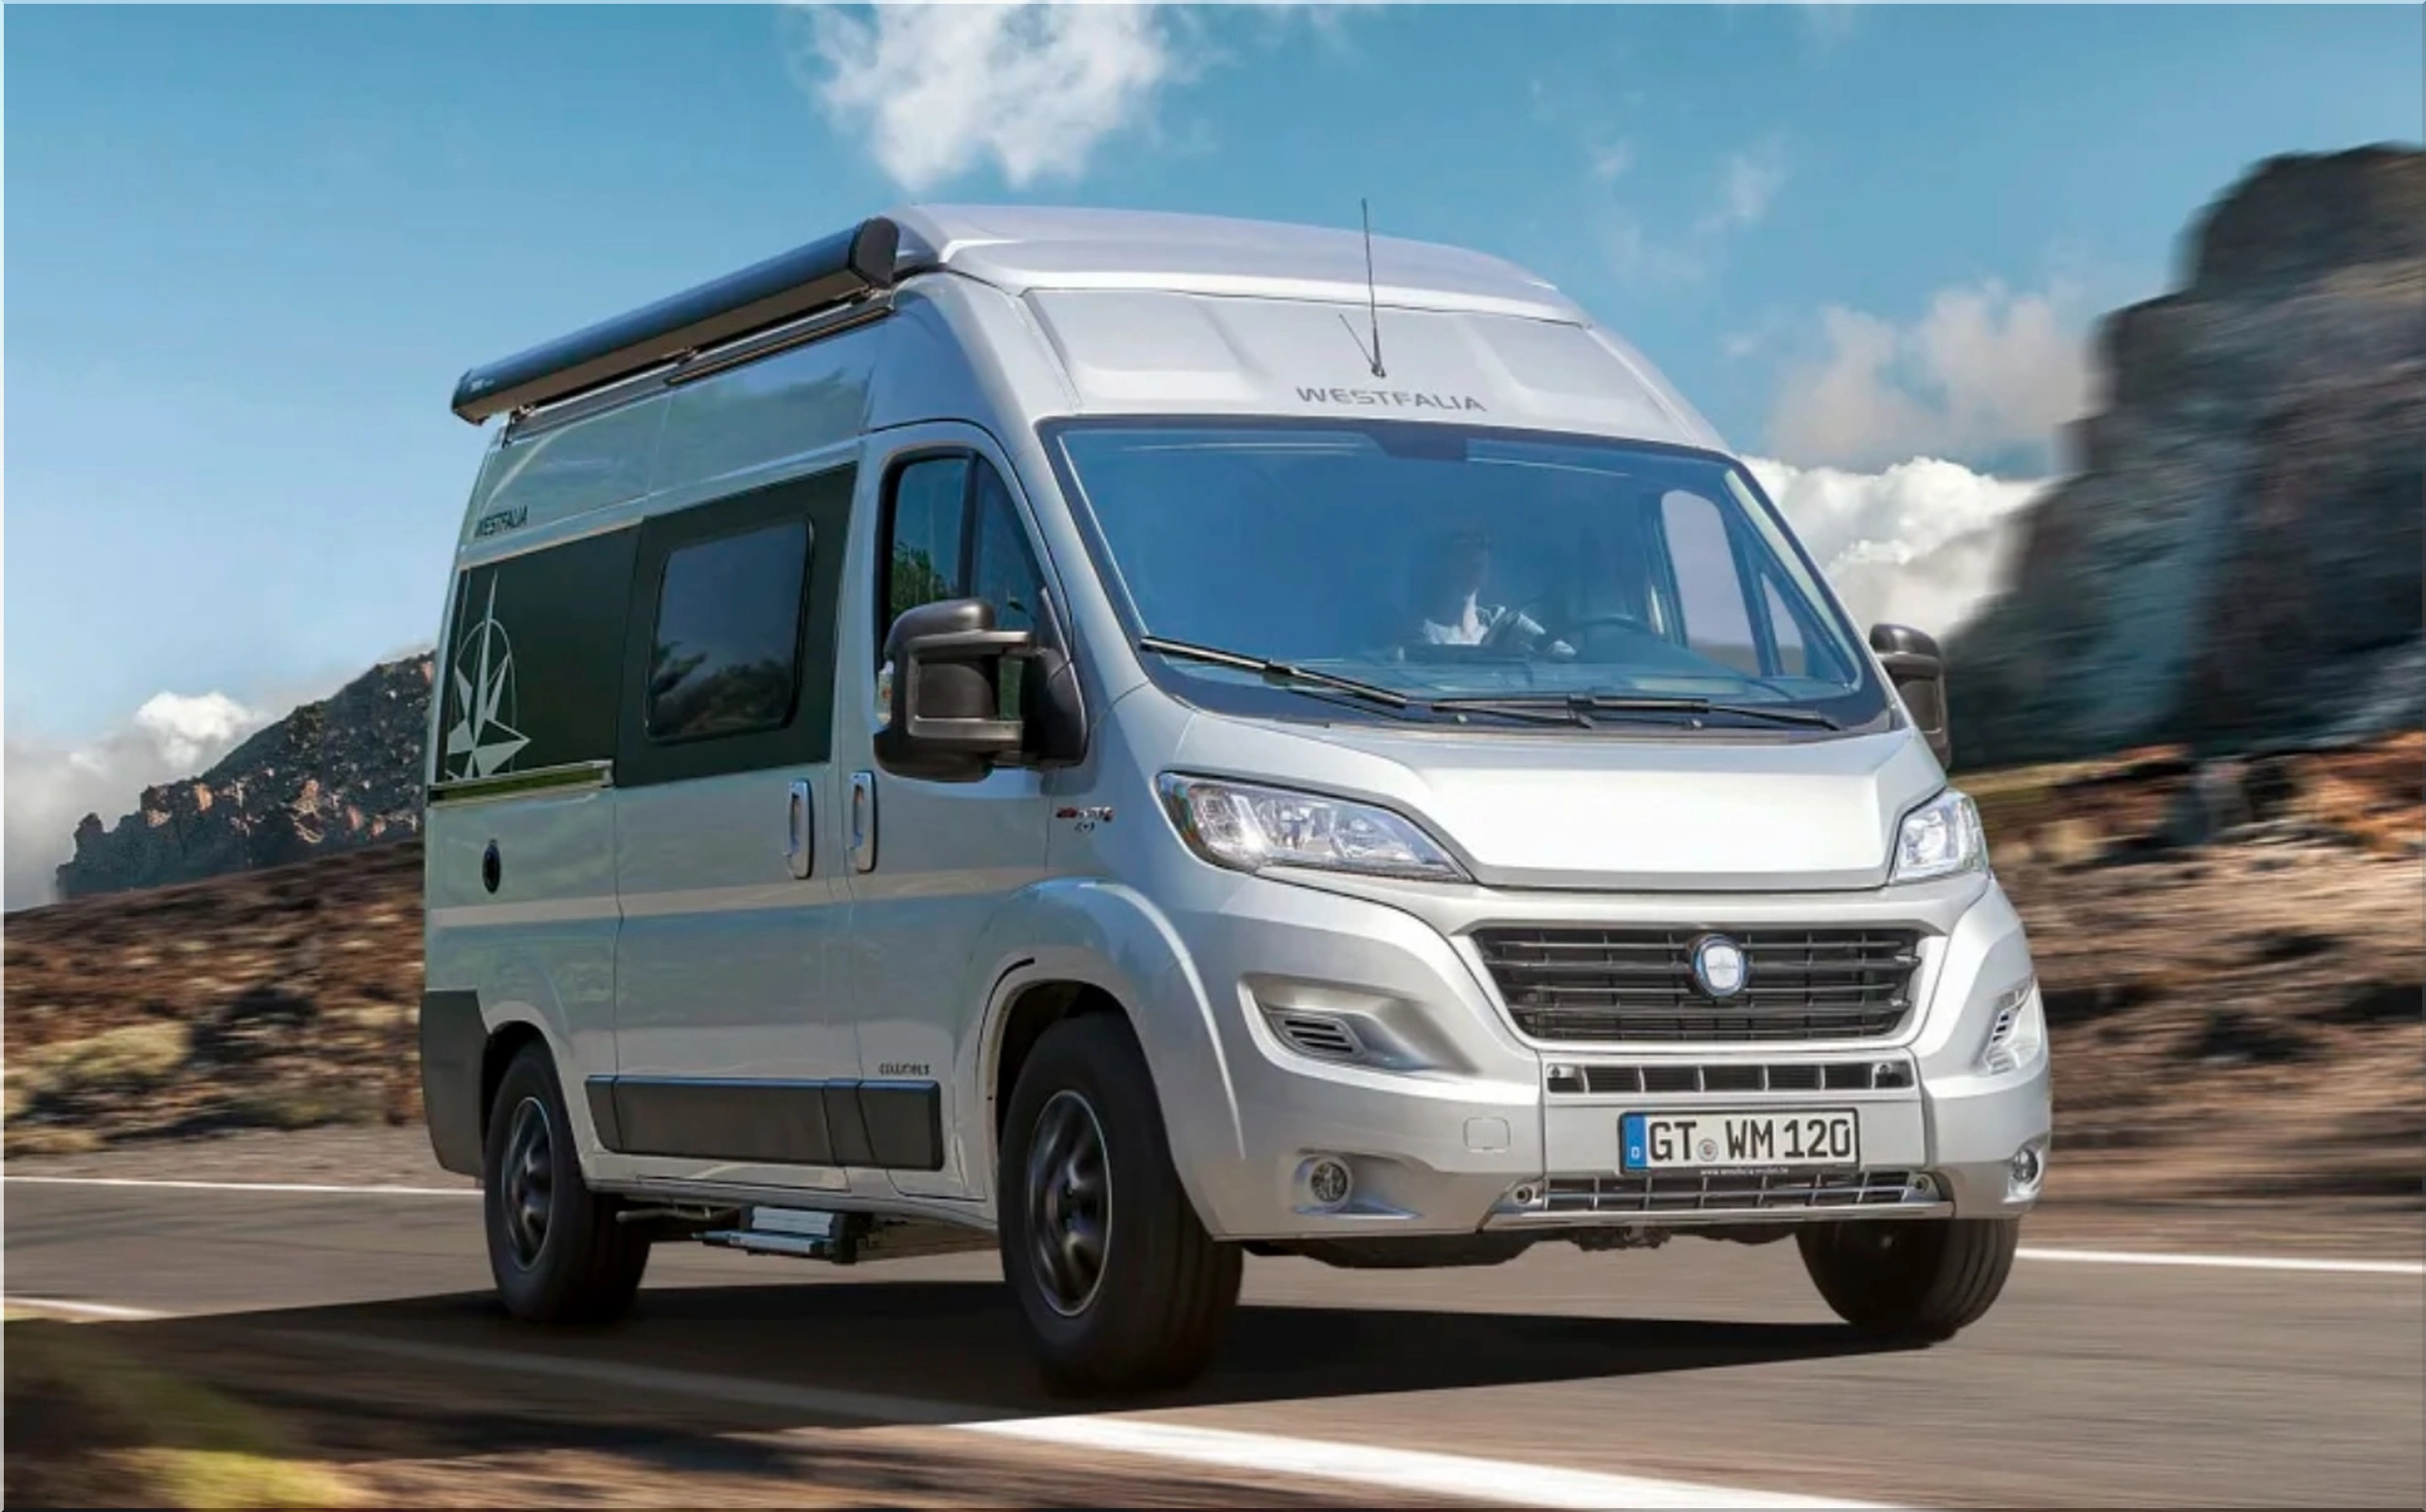 High technology and the best engines for your Fiat Ducato Camper